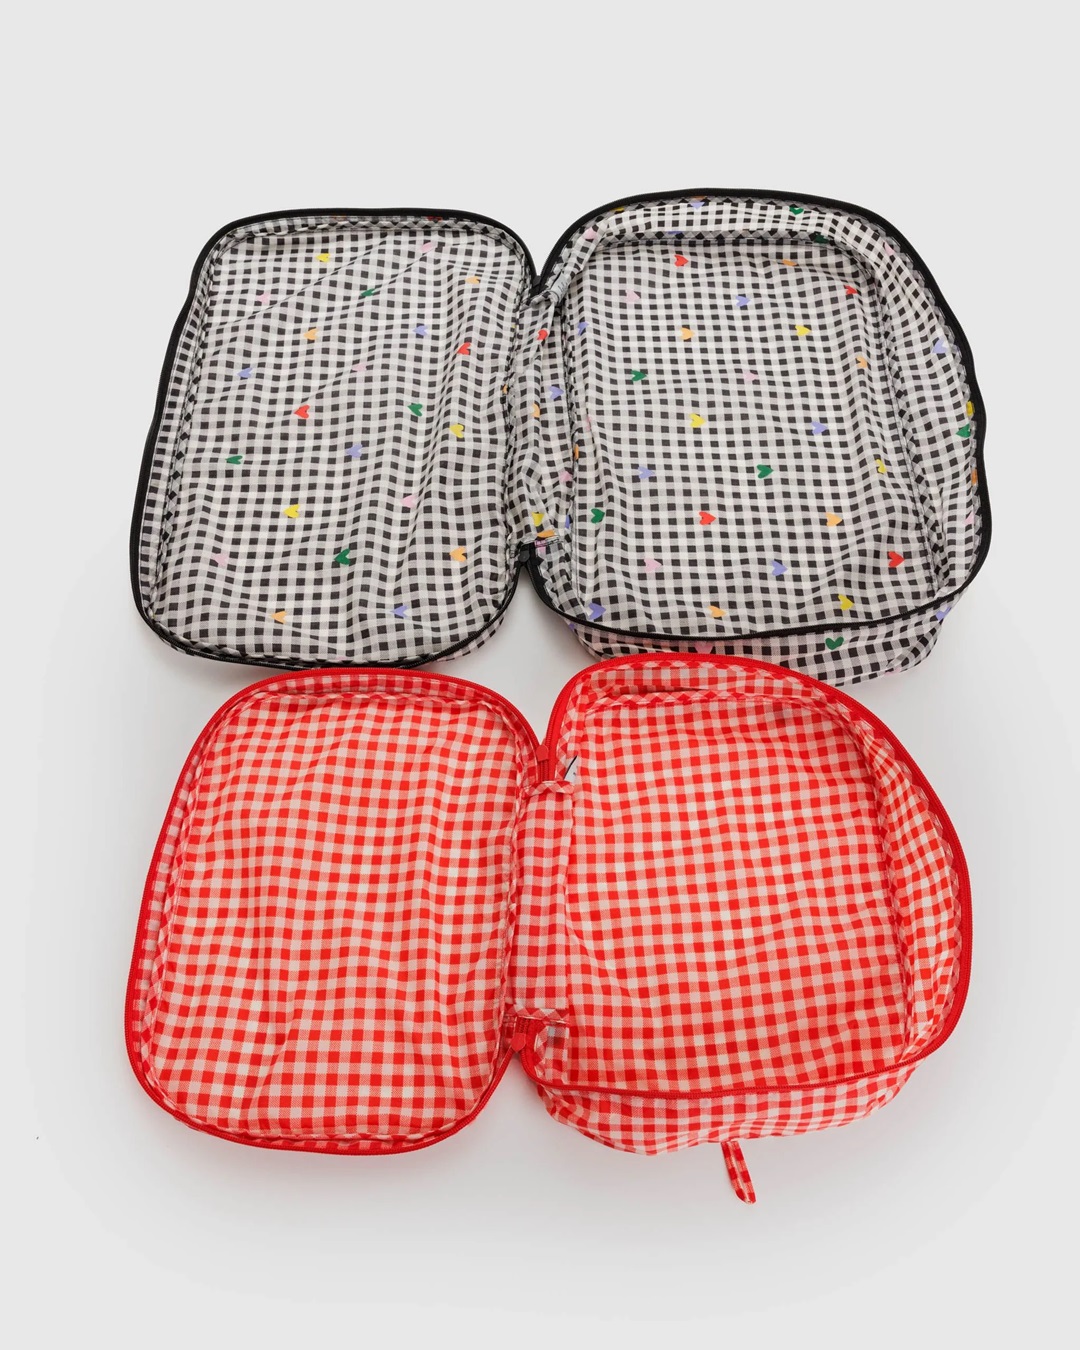 Black and red gingham packing cubes